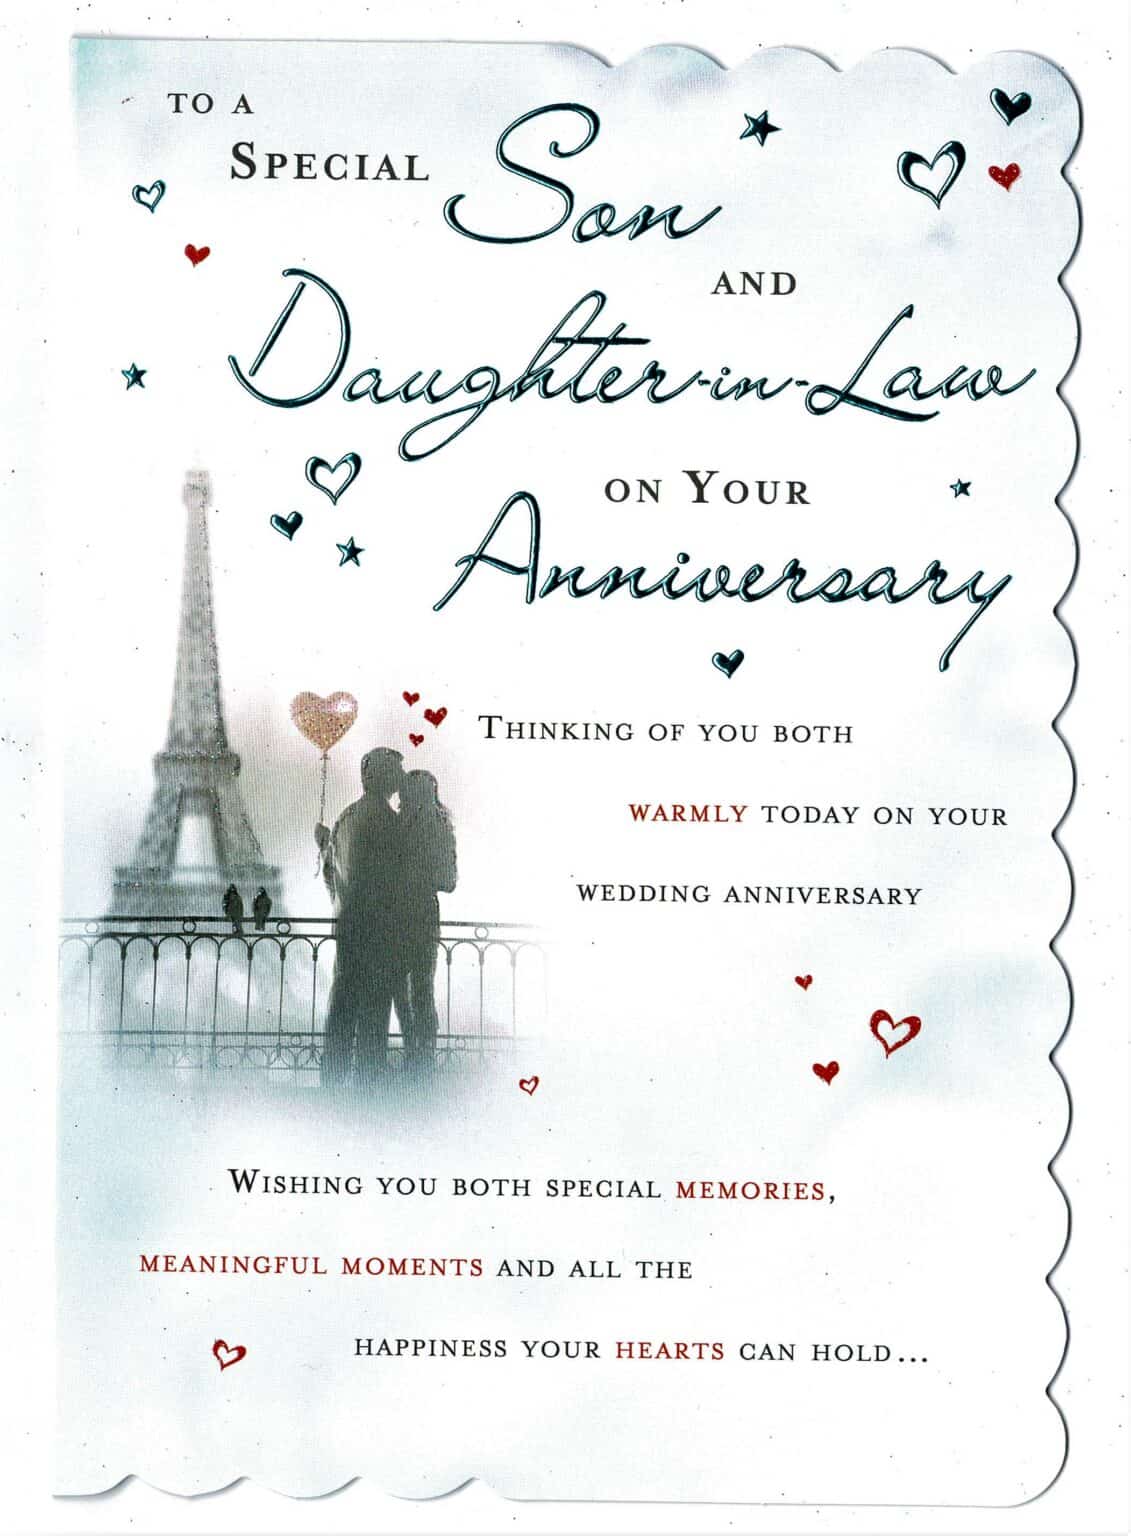 son-and-daughter-in-law-anniversary-card-with-sentiment-verse-with-love-gifts-cards